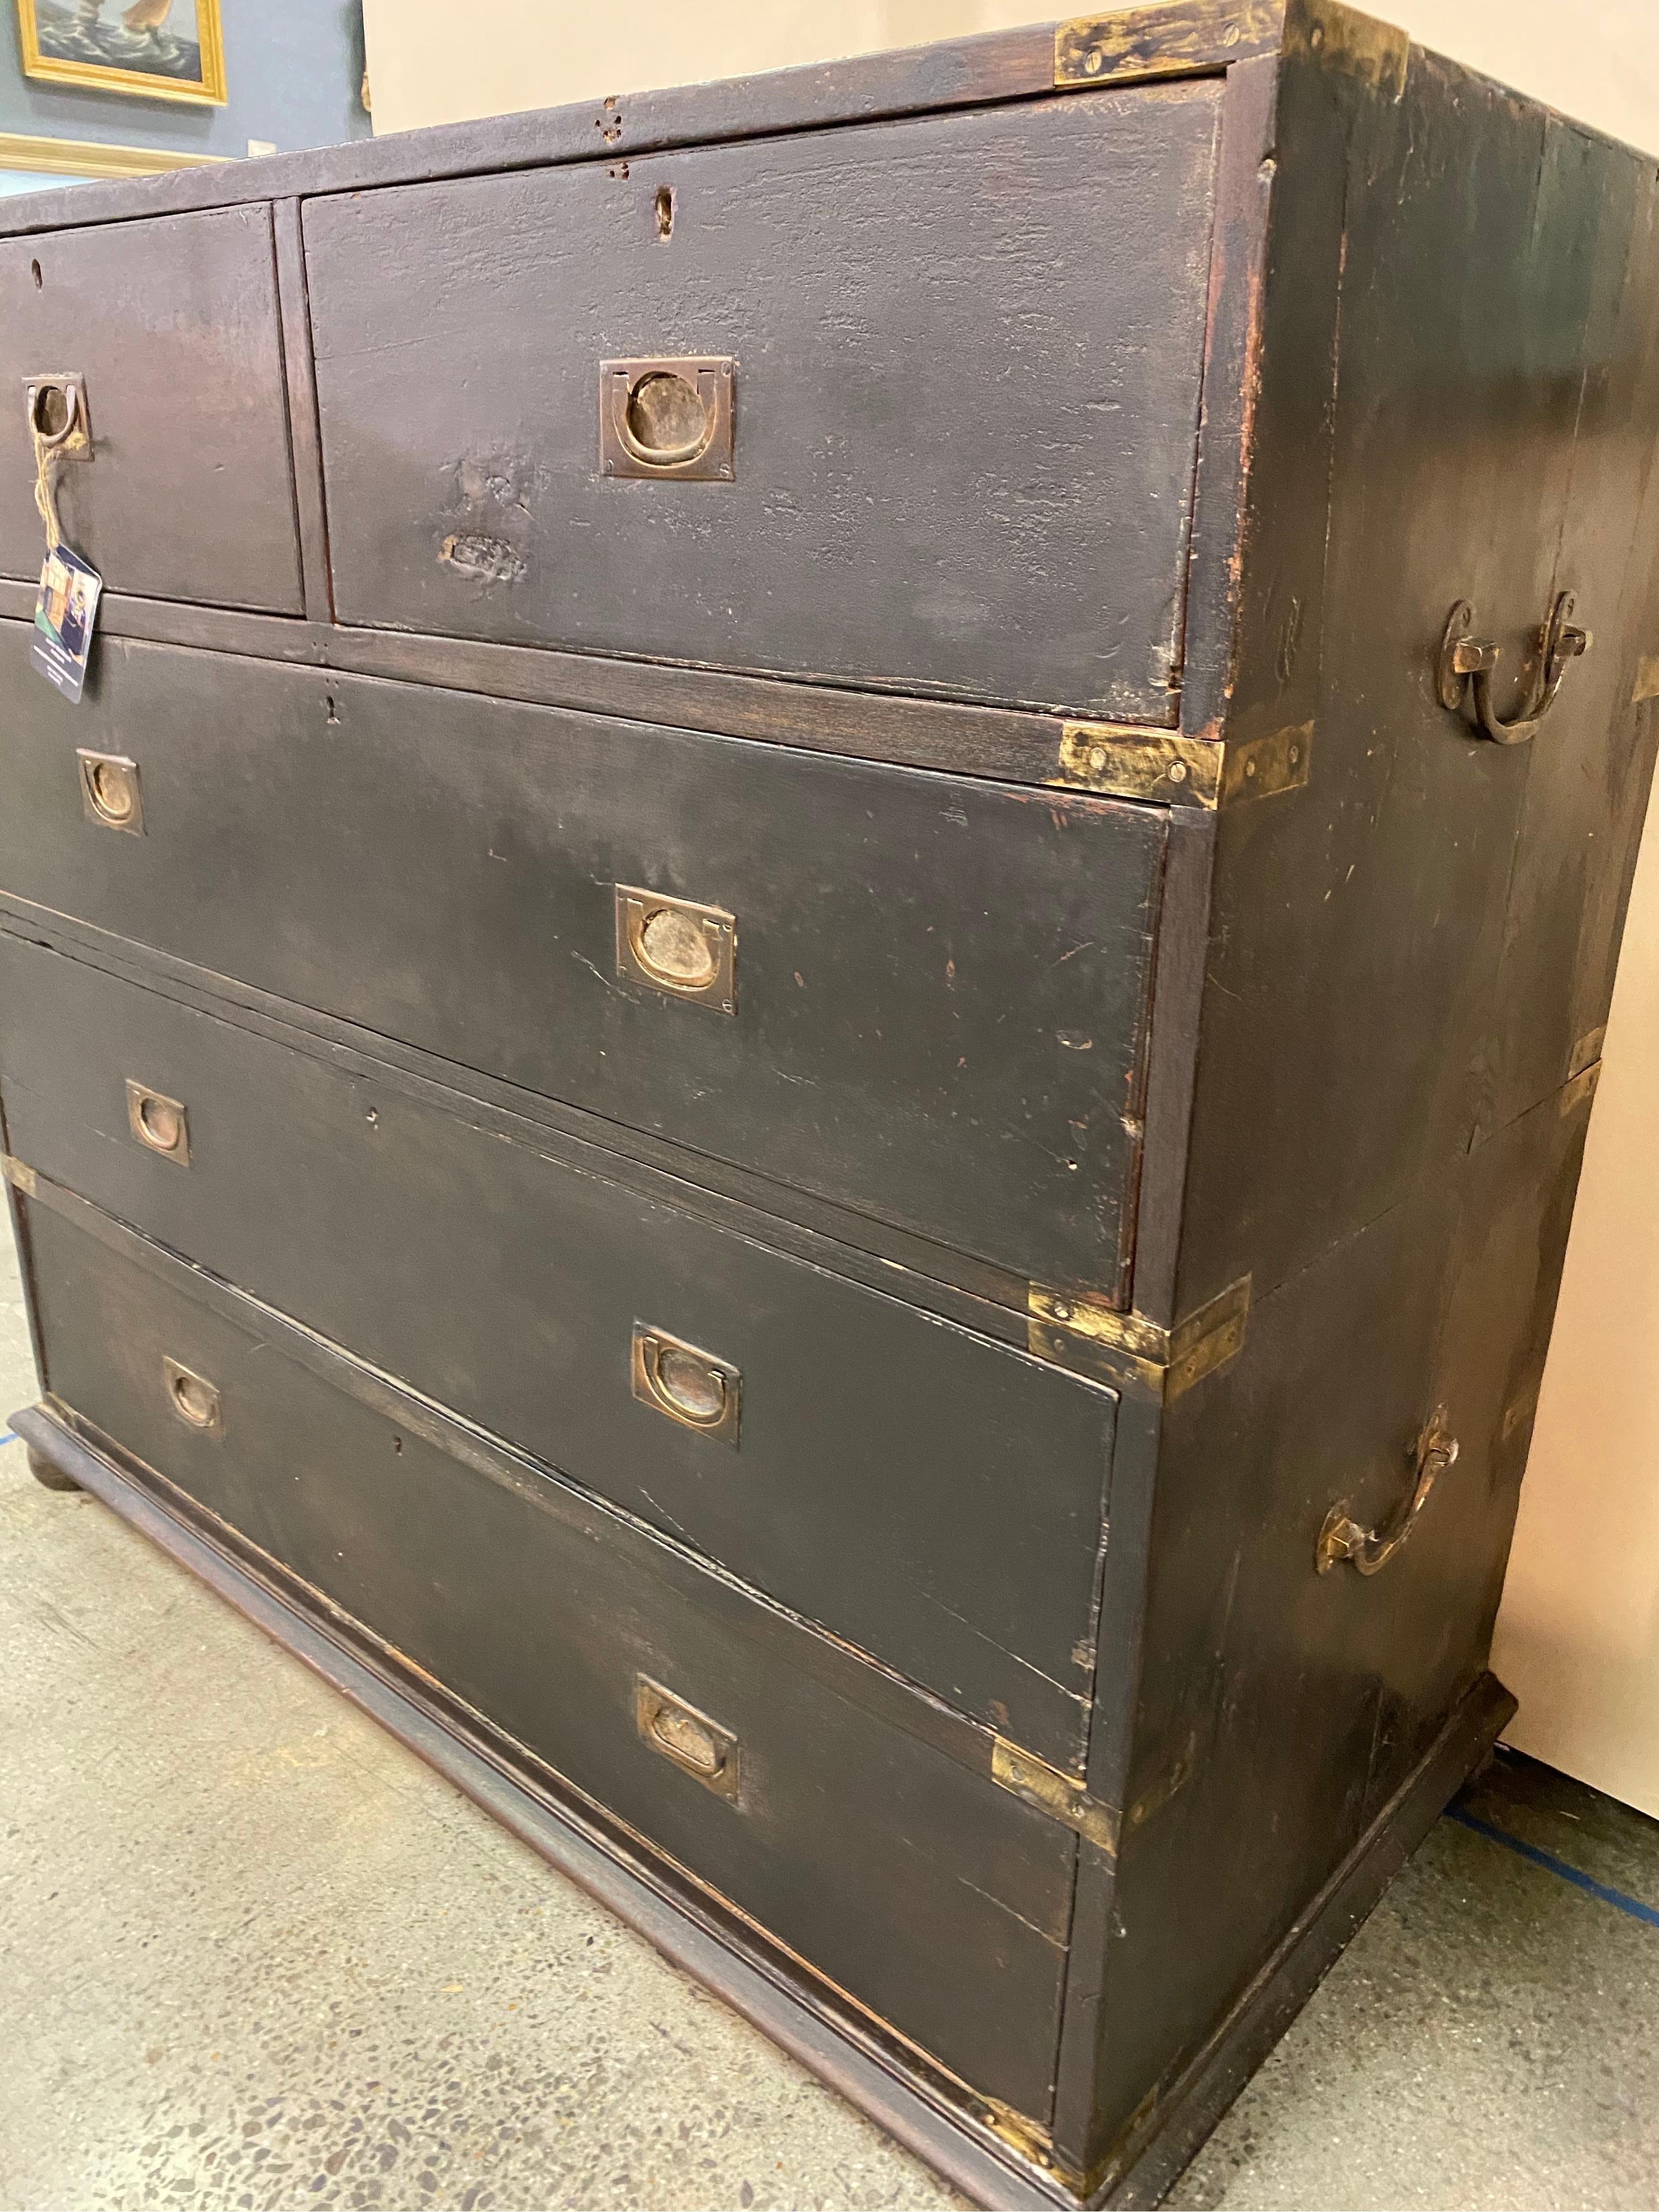 19th century British Colonial ebonized brass bound Campaign chest from the British East Indies. Original finish and patina with bits of the underlying mahogany exposed on the top from wear. This piece is in good shape with typical signs of wear and